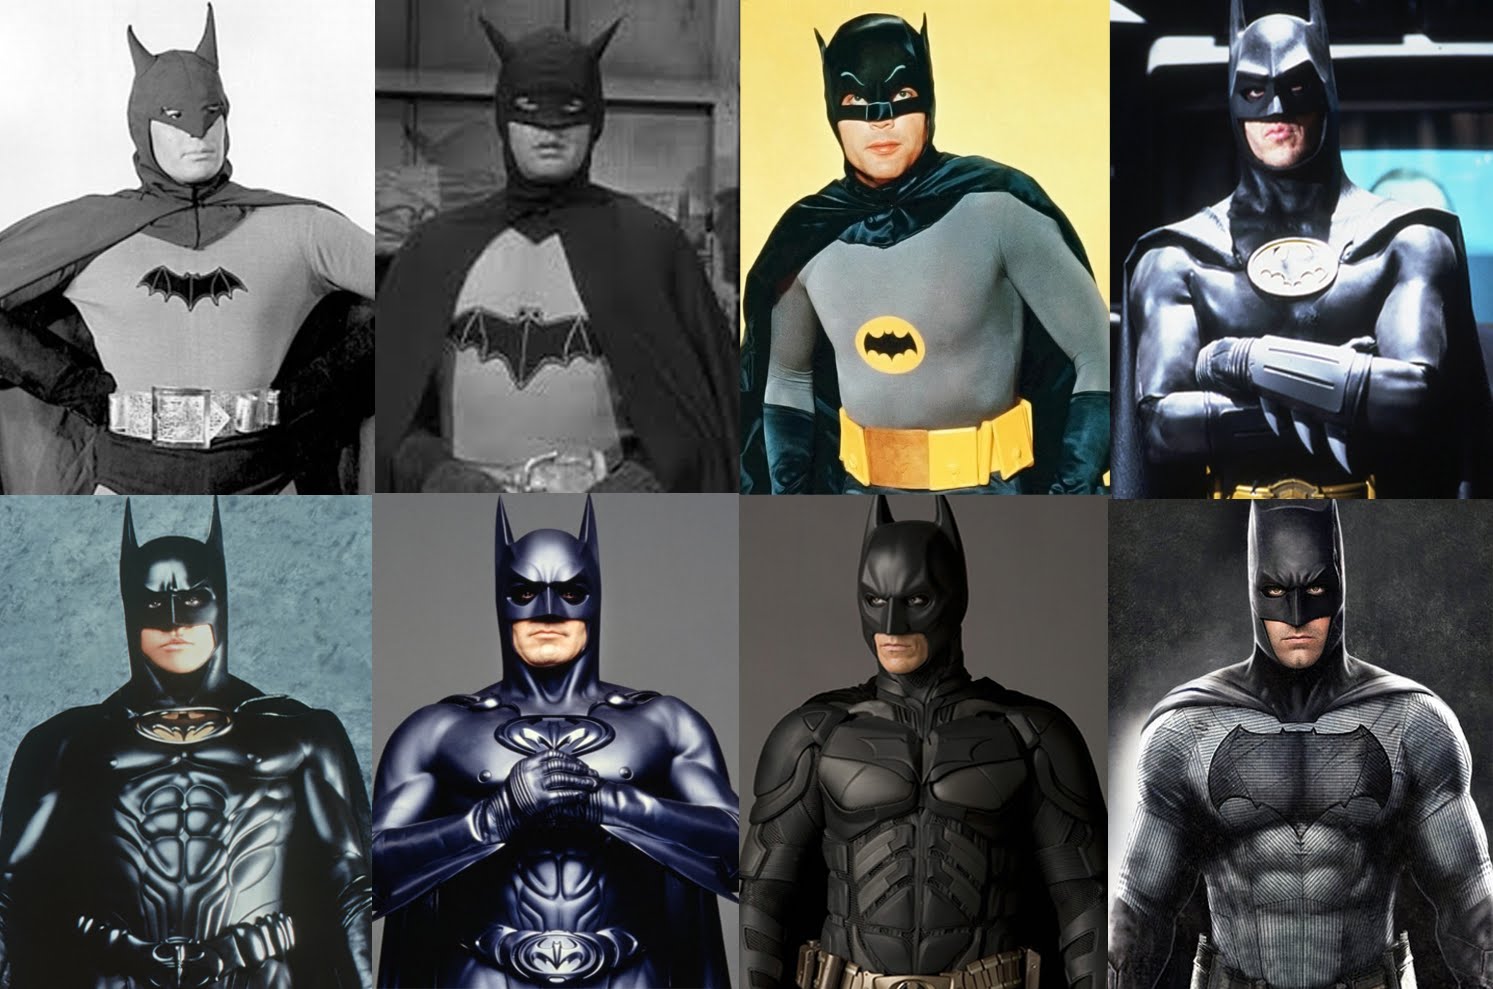 Ranking the Batman movie suits from worst to best